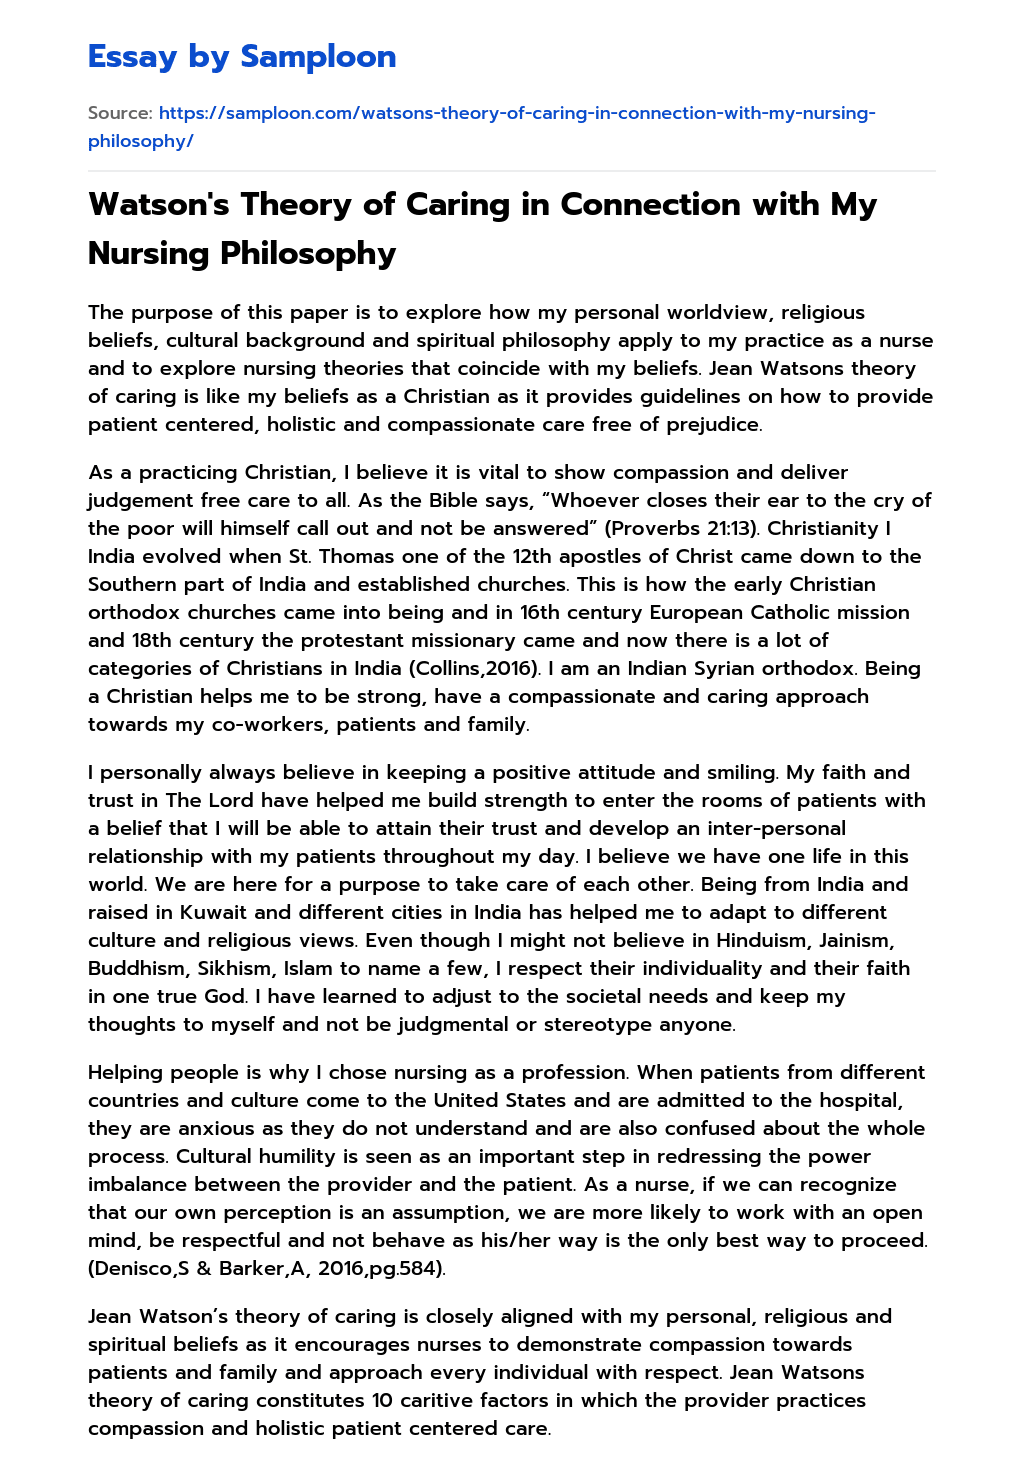 Watson’s Theory of Caring in Connection with My Nursing Philosophy essay